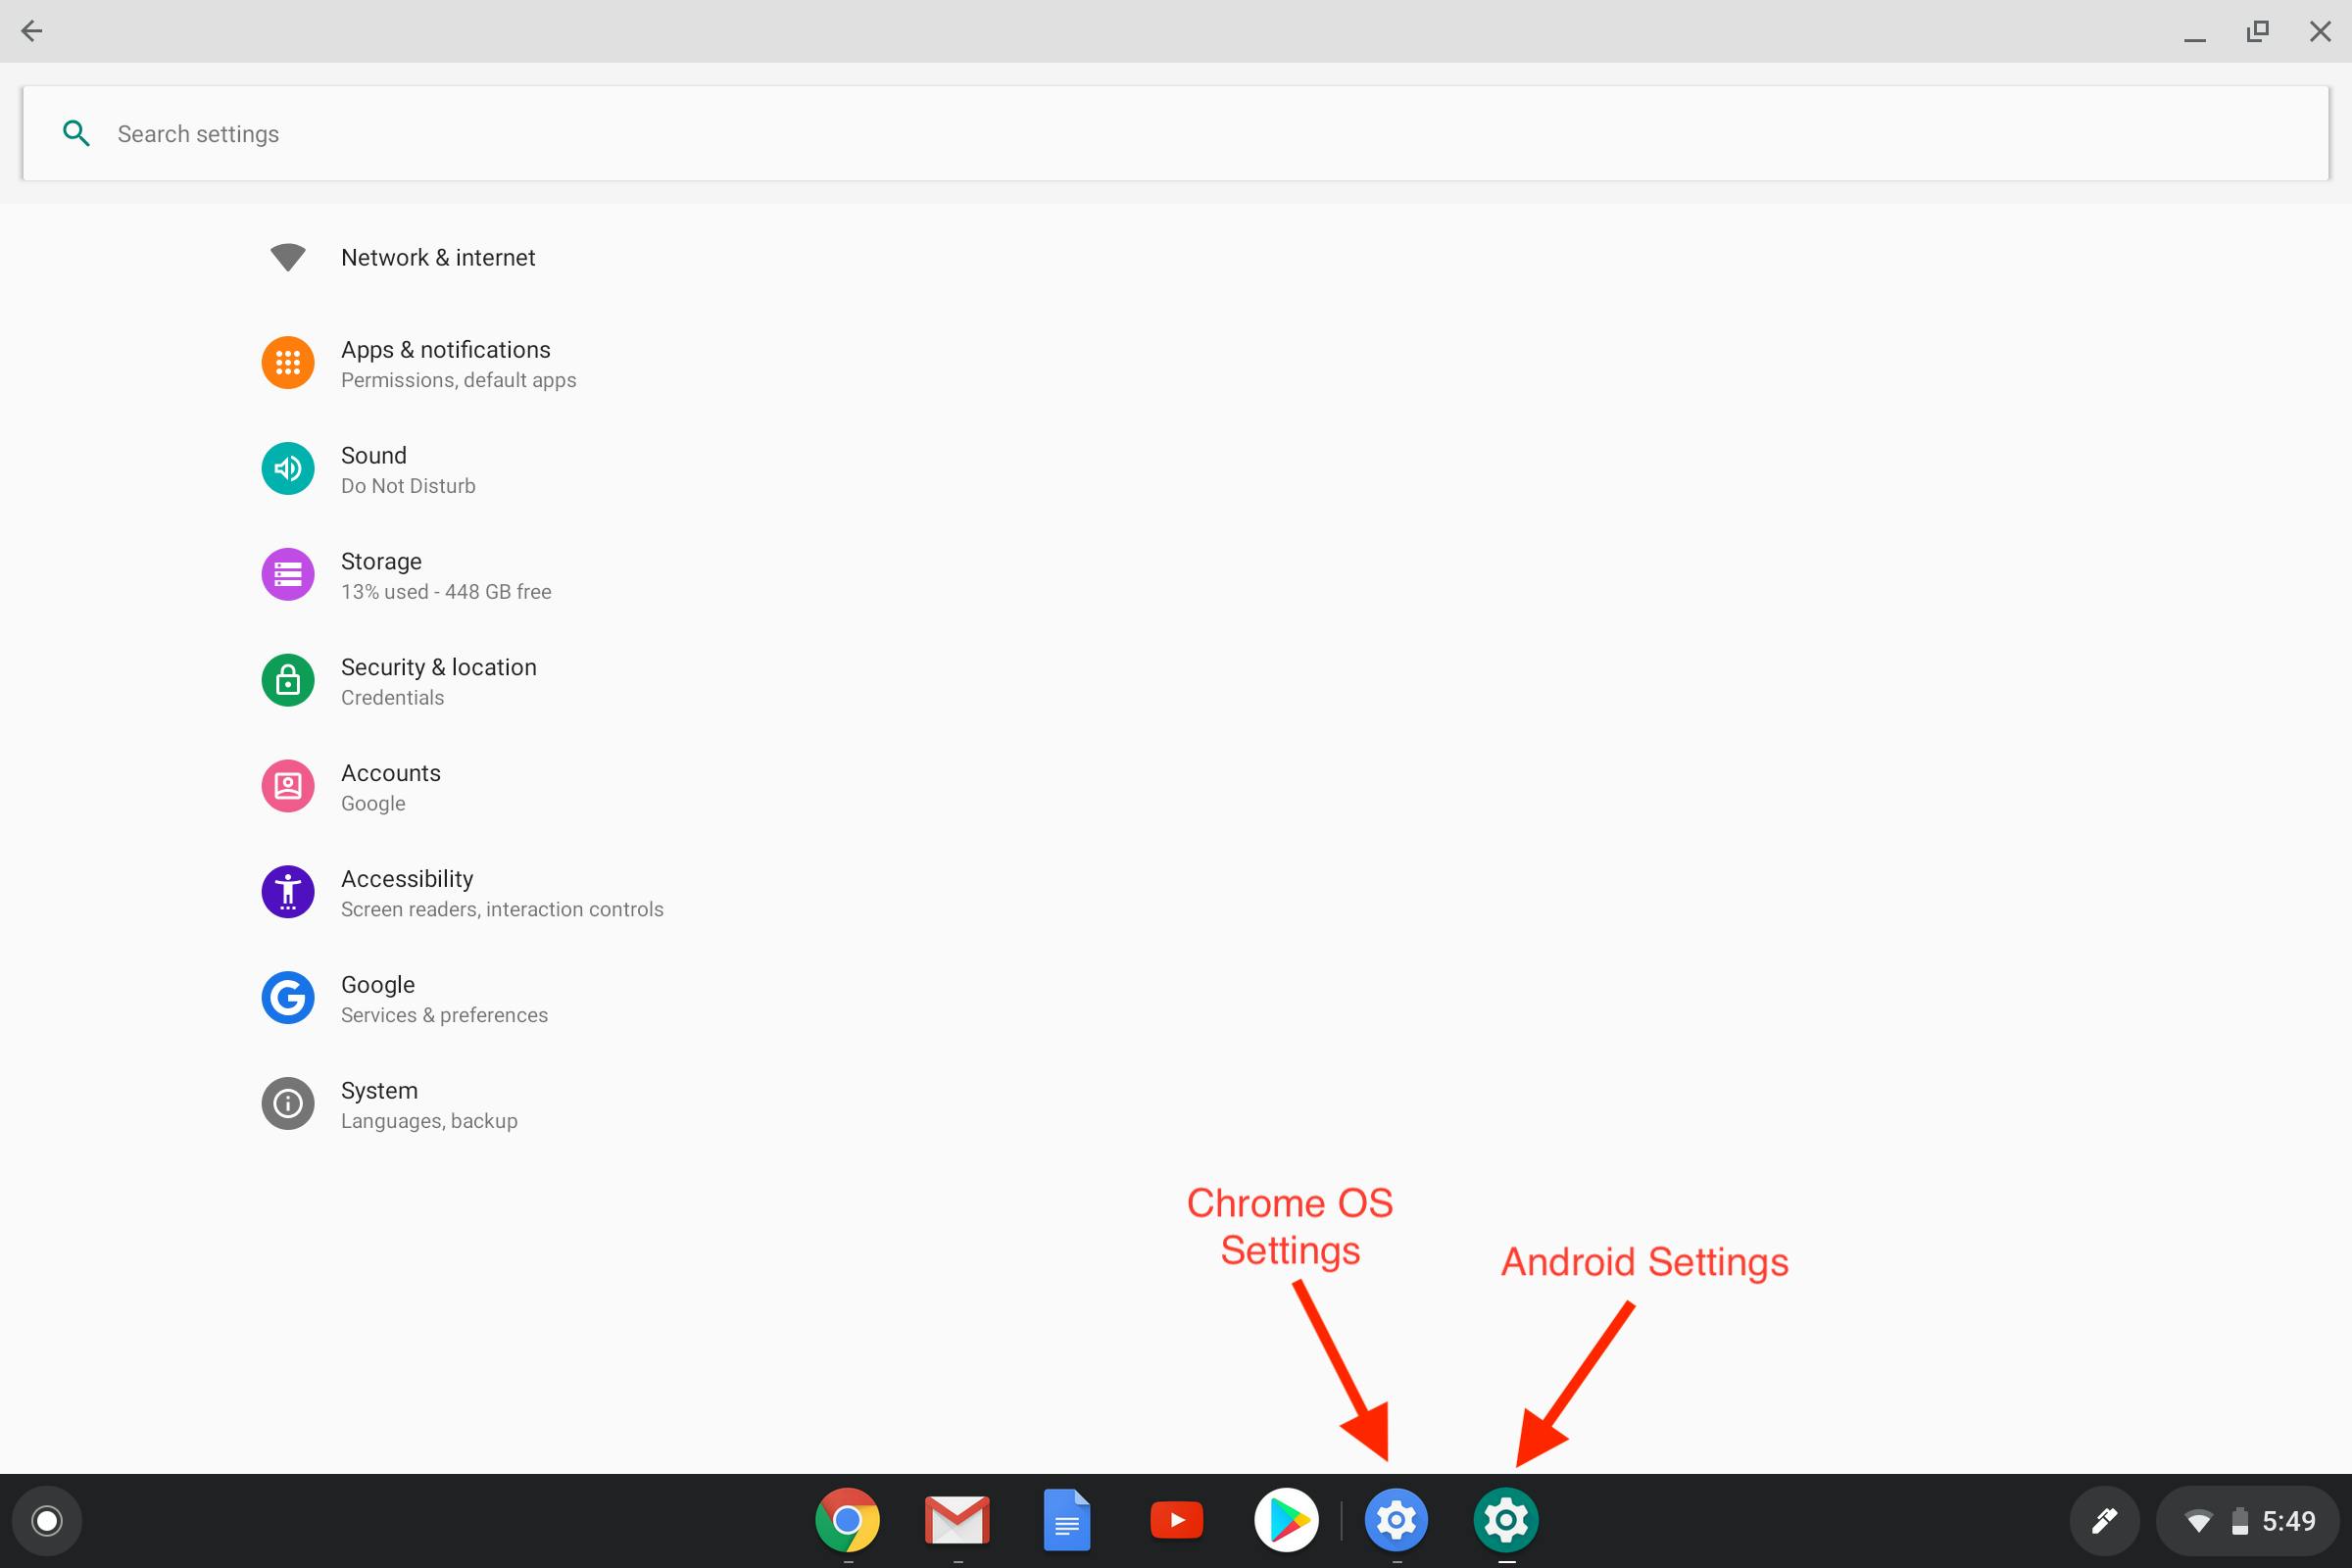 The ChromeOS and Android settings icons look very similar, but for Android settings, the gear is slightly larger and the background color is green.